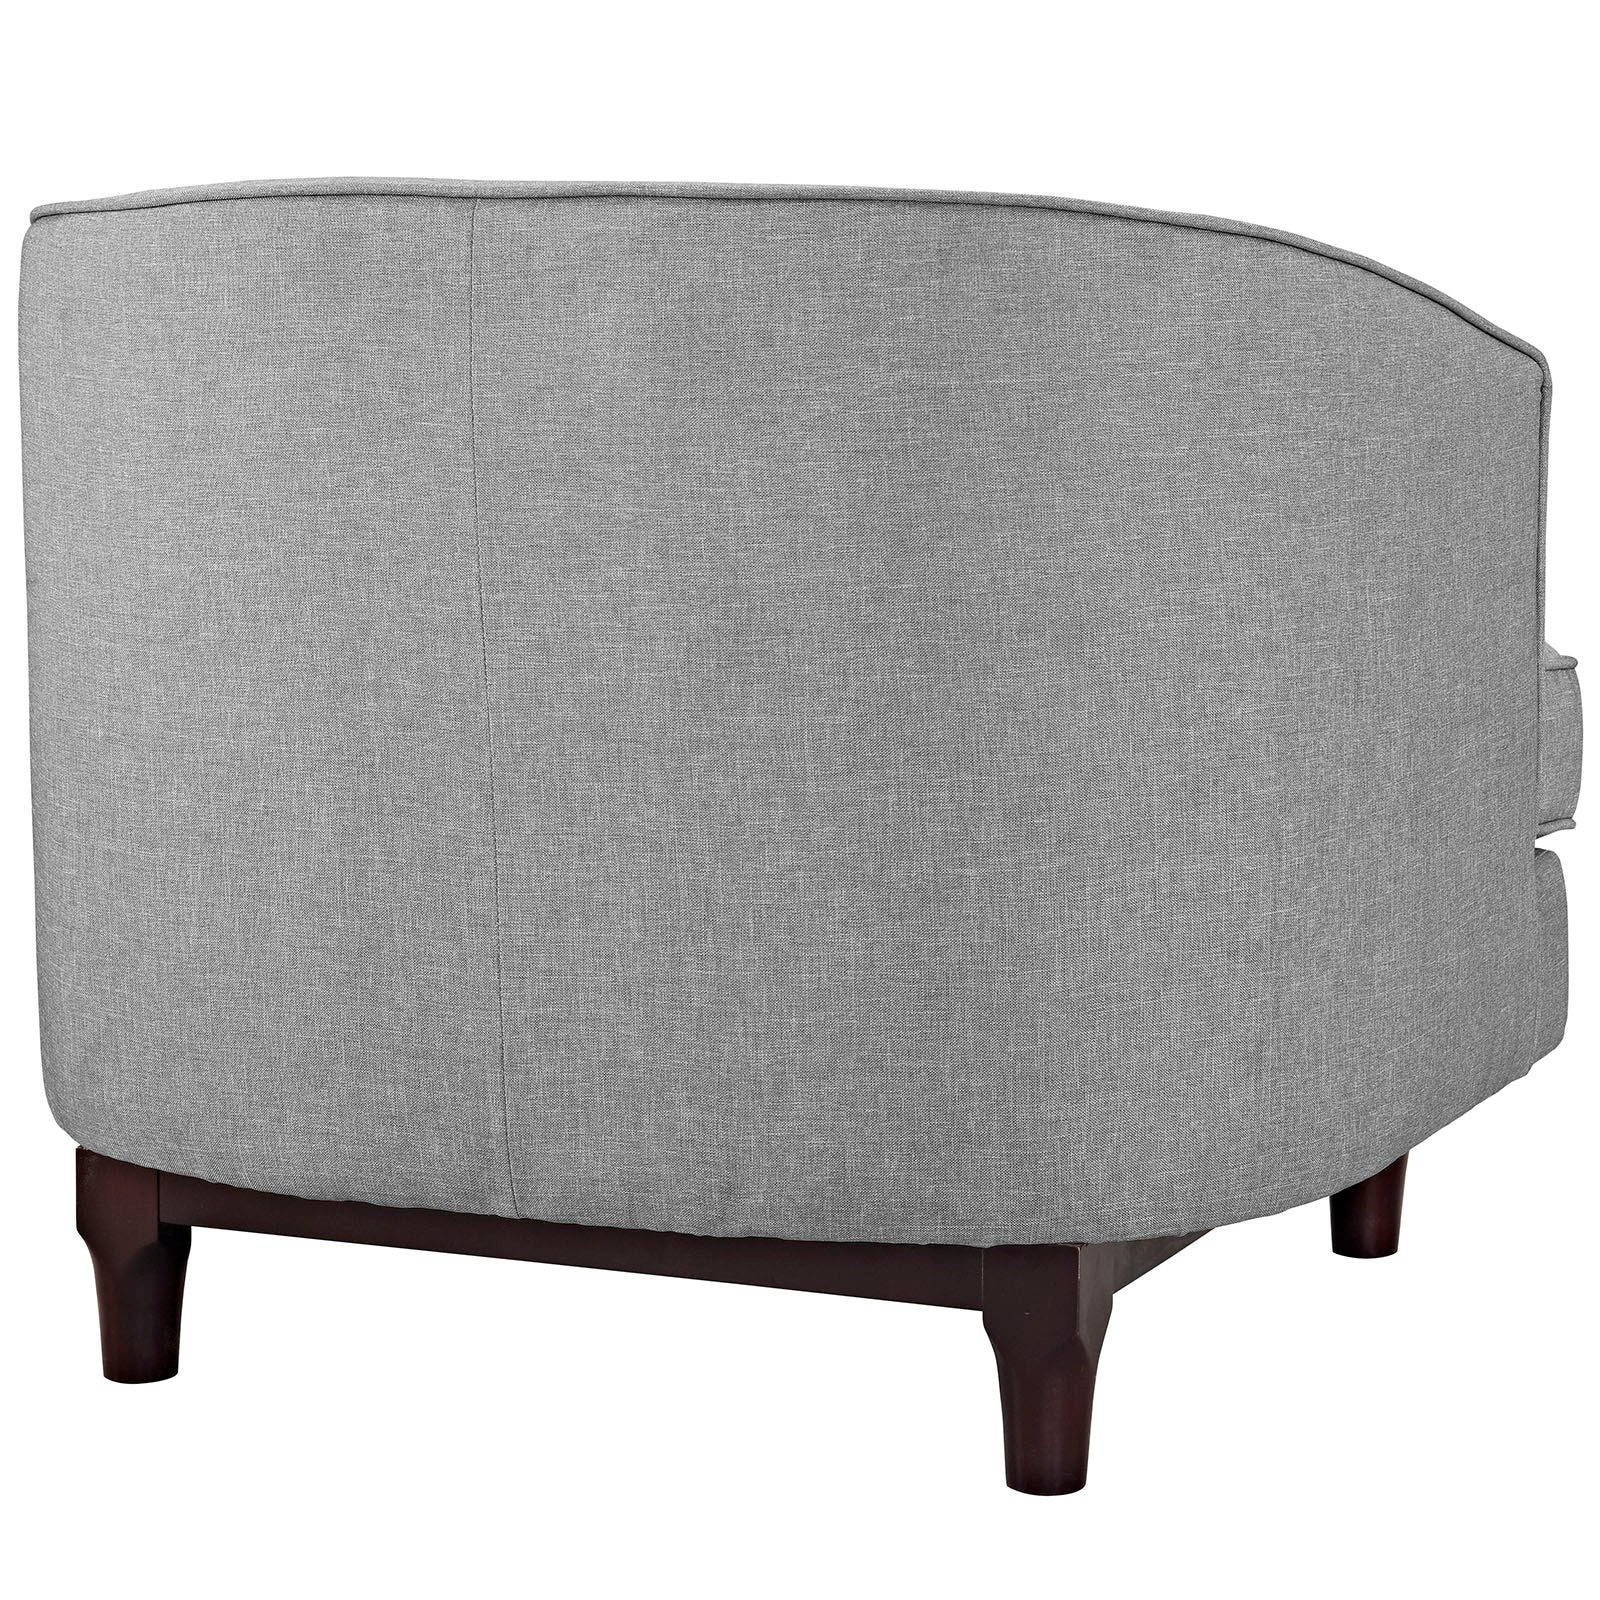 Modway Chairs - Coast Upholstered Fabric Armchair Light Gray